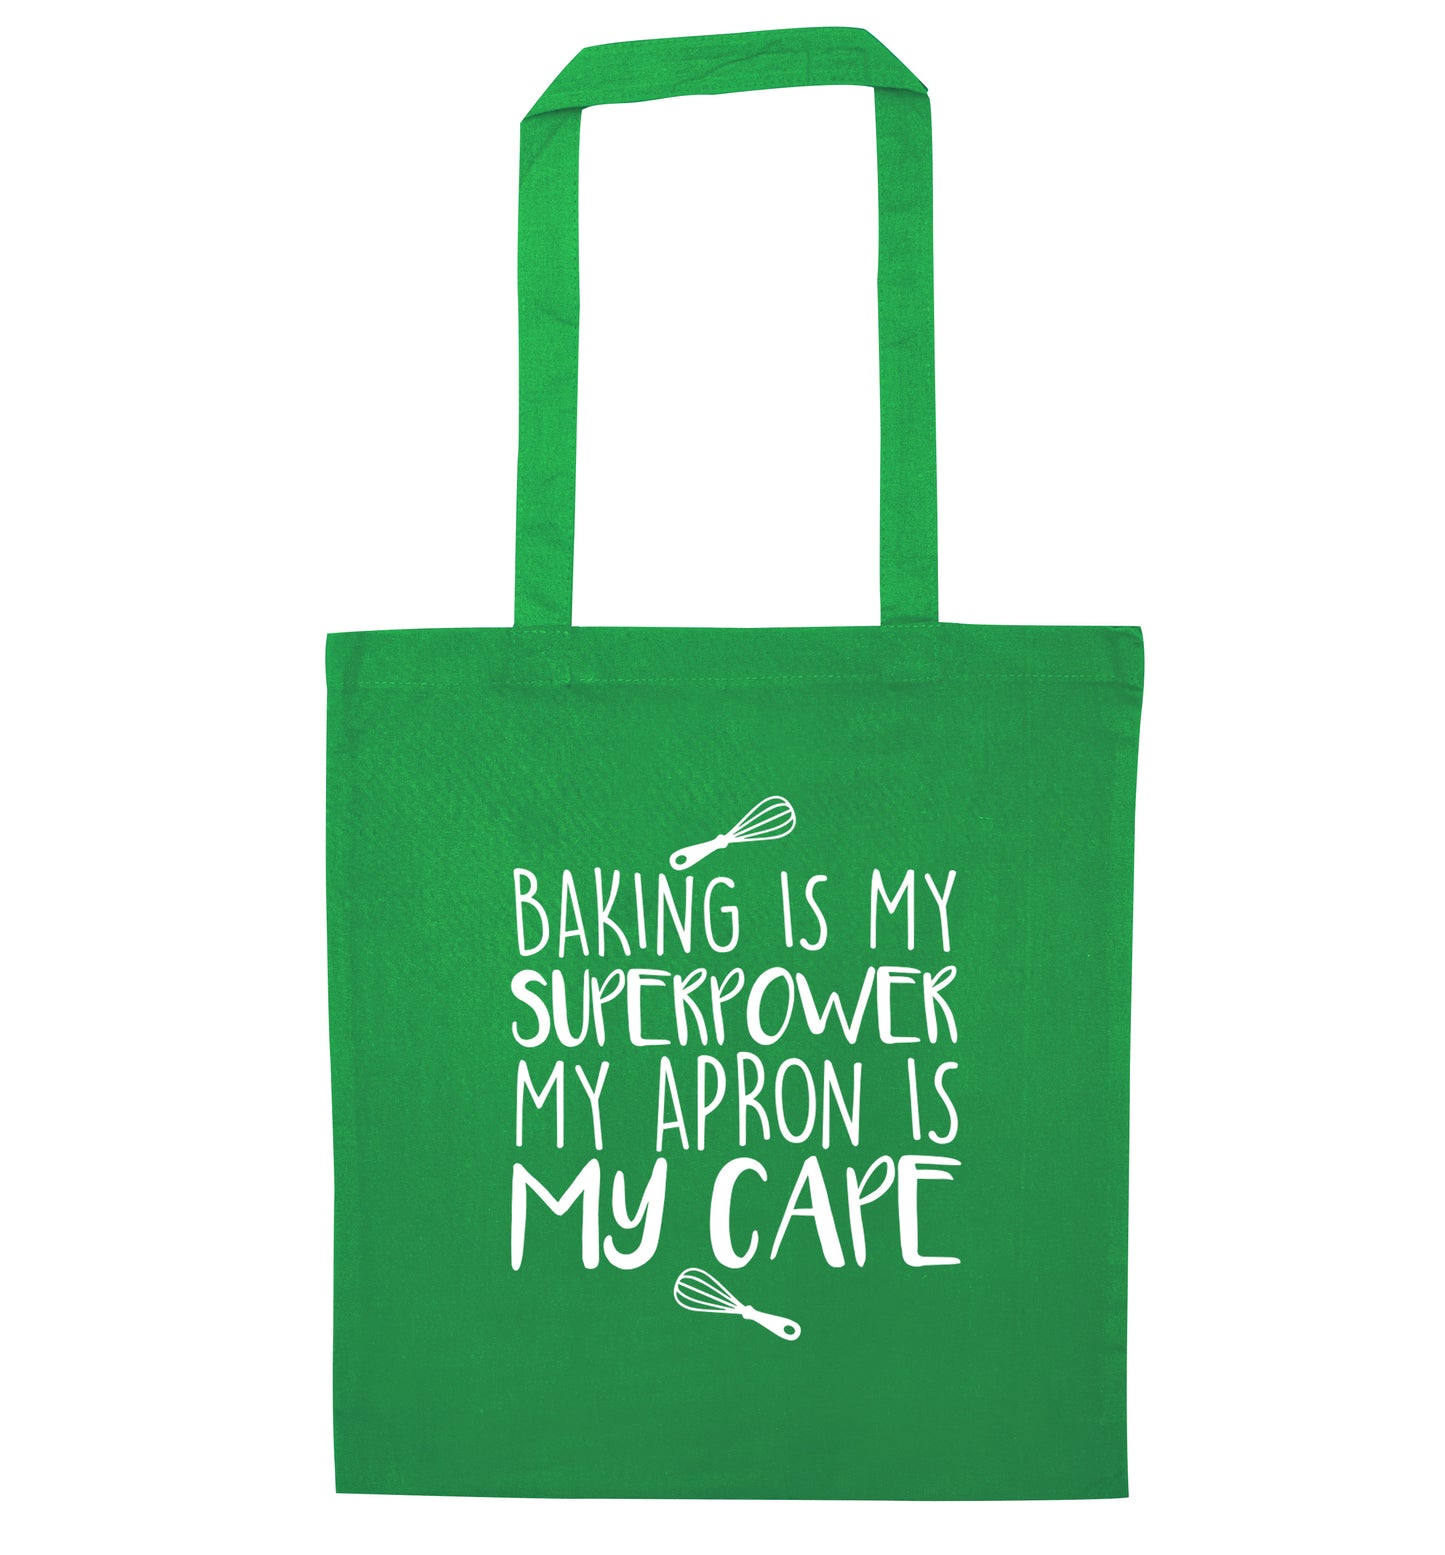 Baking is my superpower my apron is my cape green tote bag